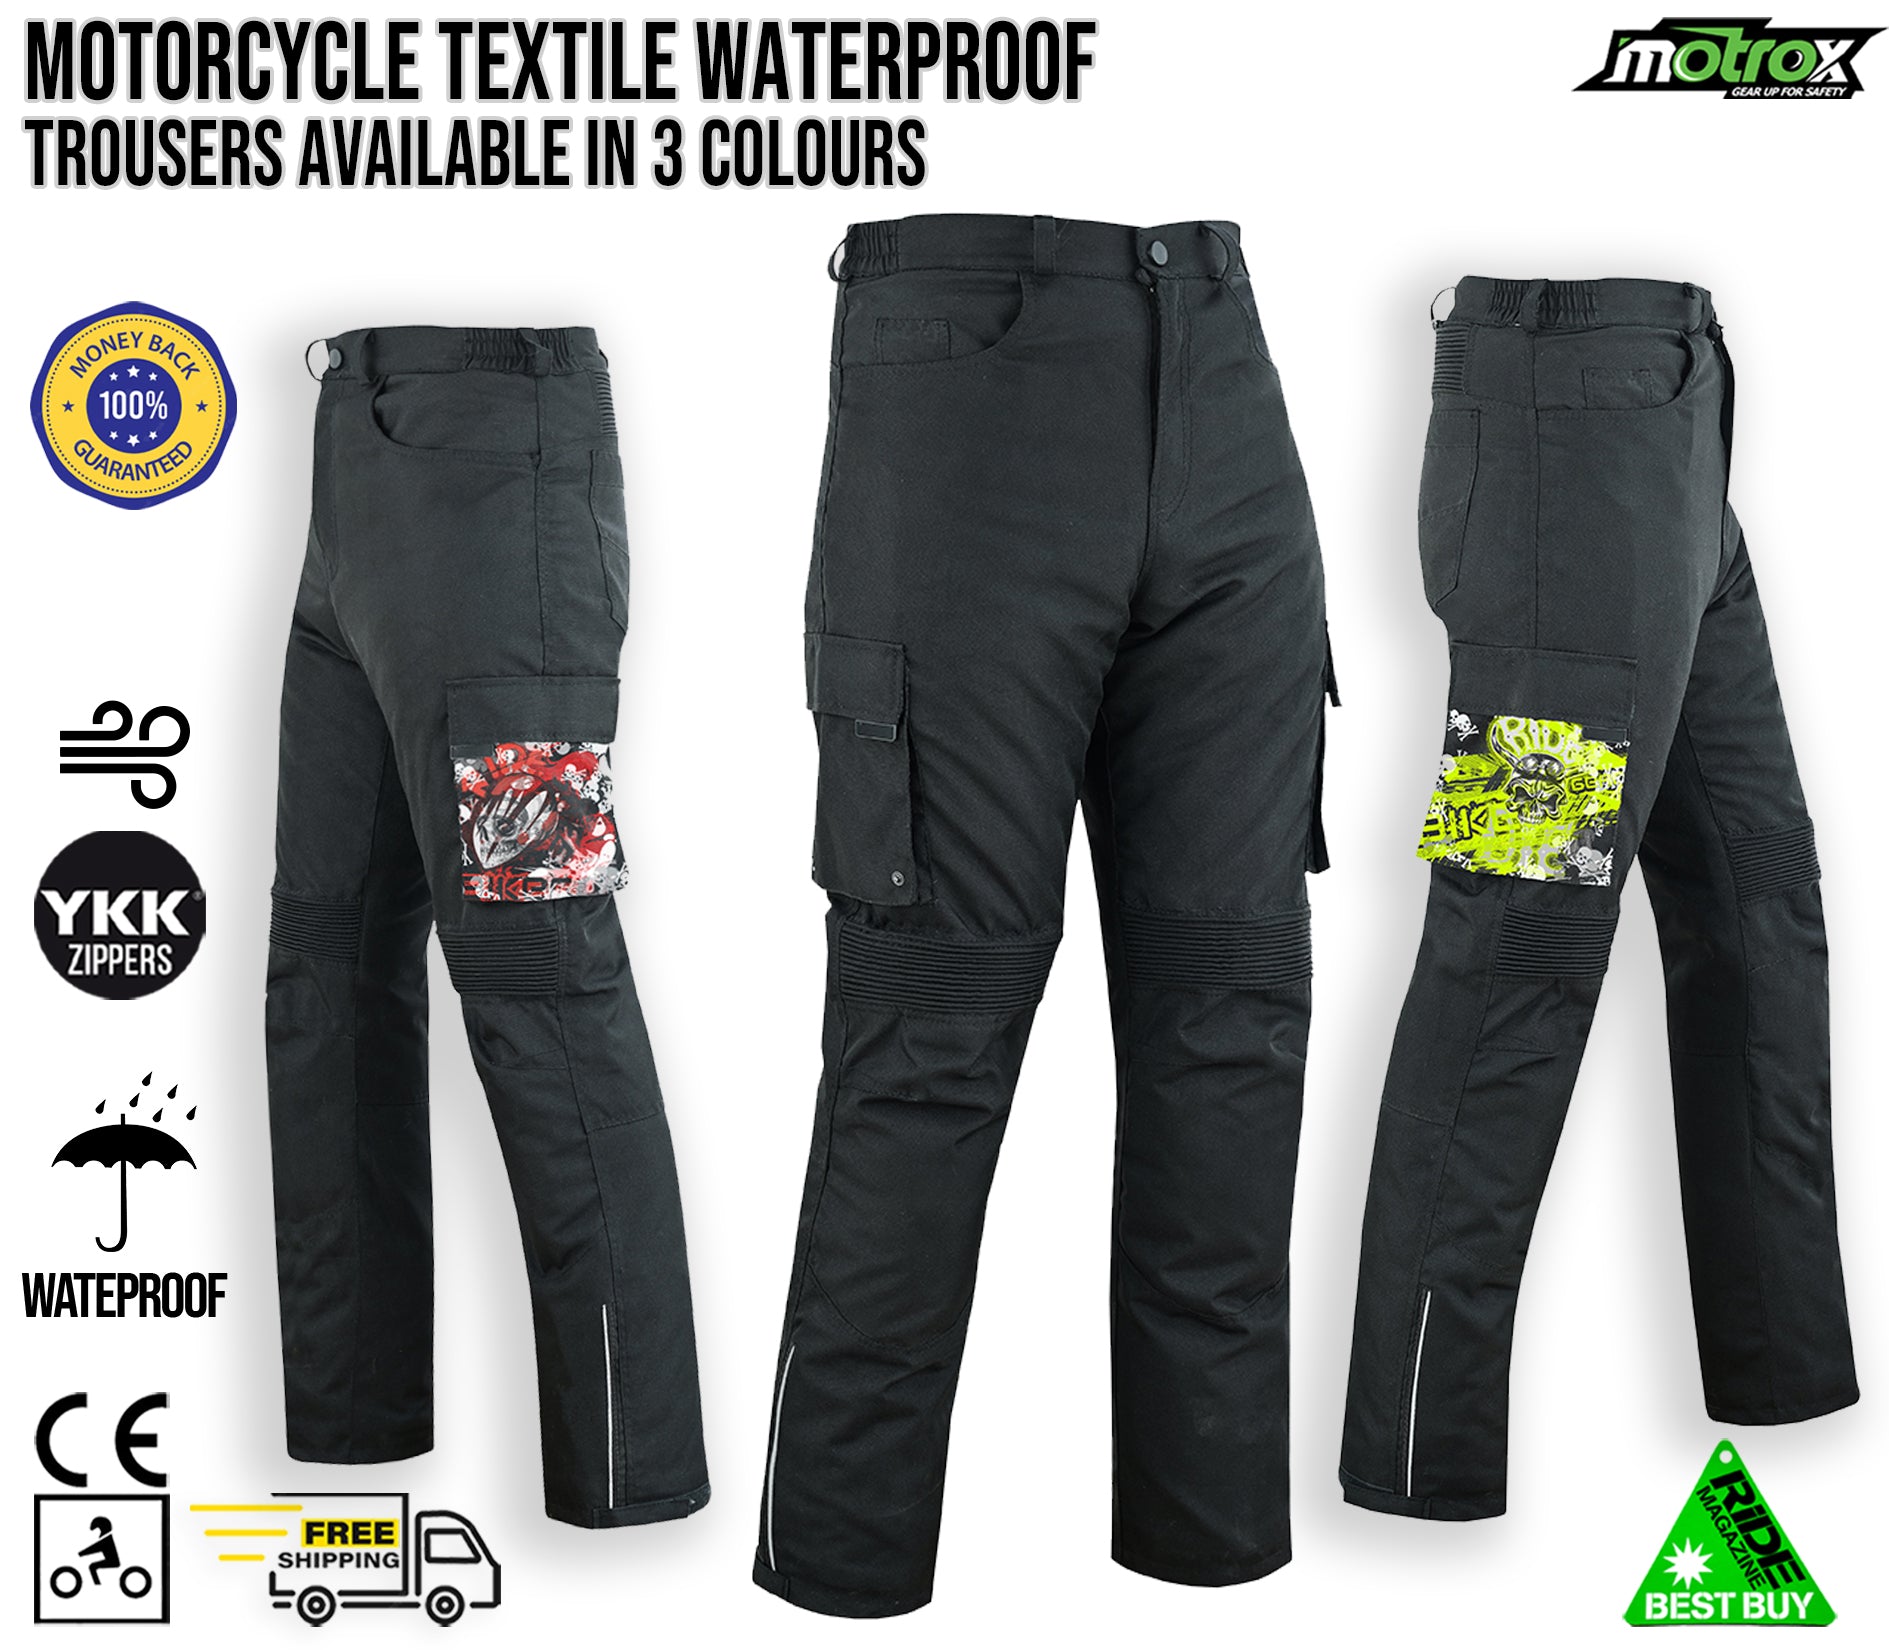 Motorcycle jeans and armoured motorbike protective clothing